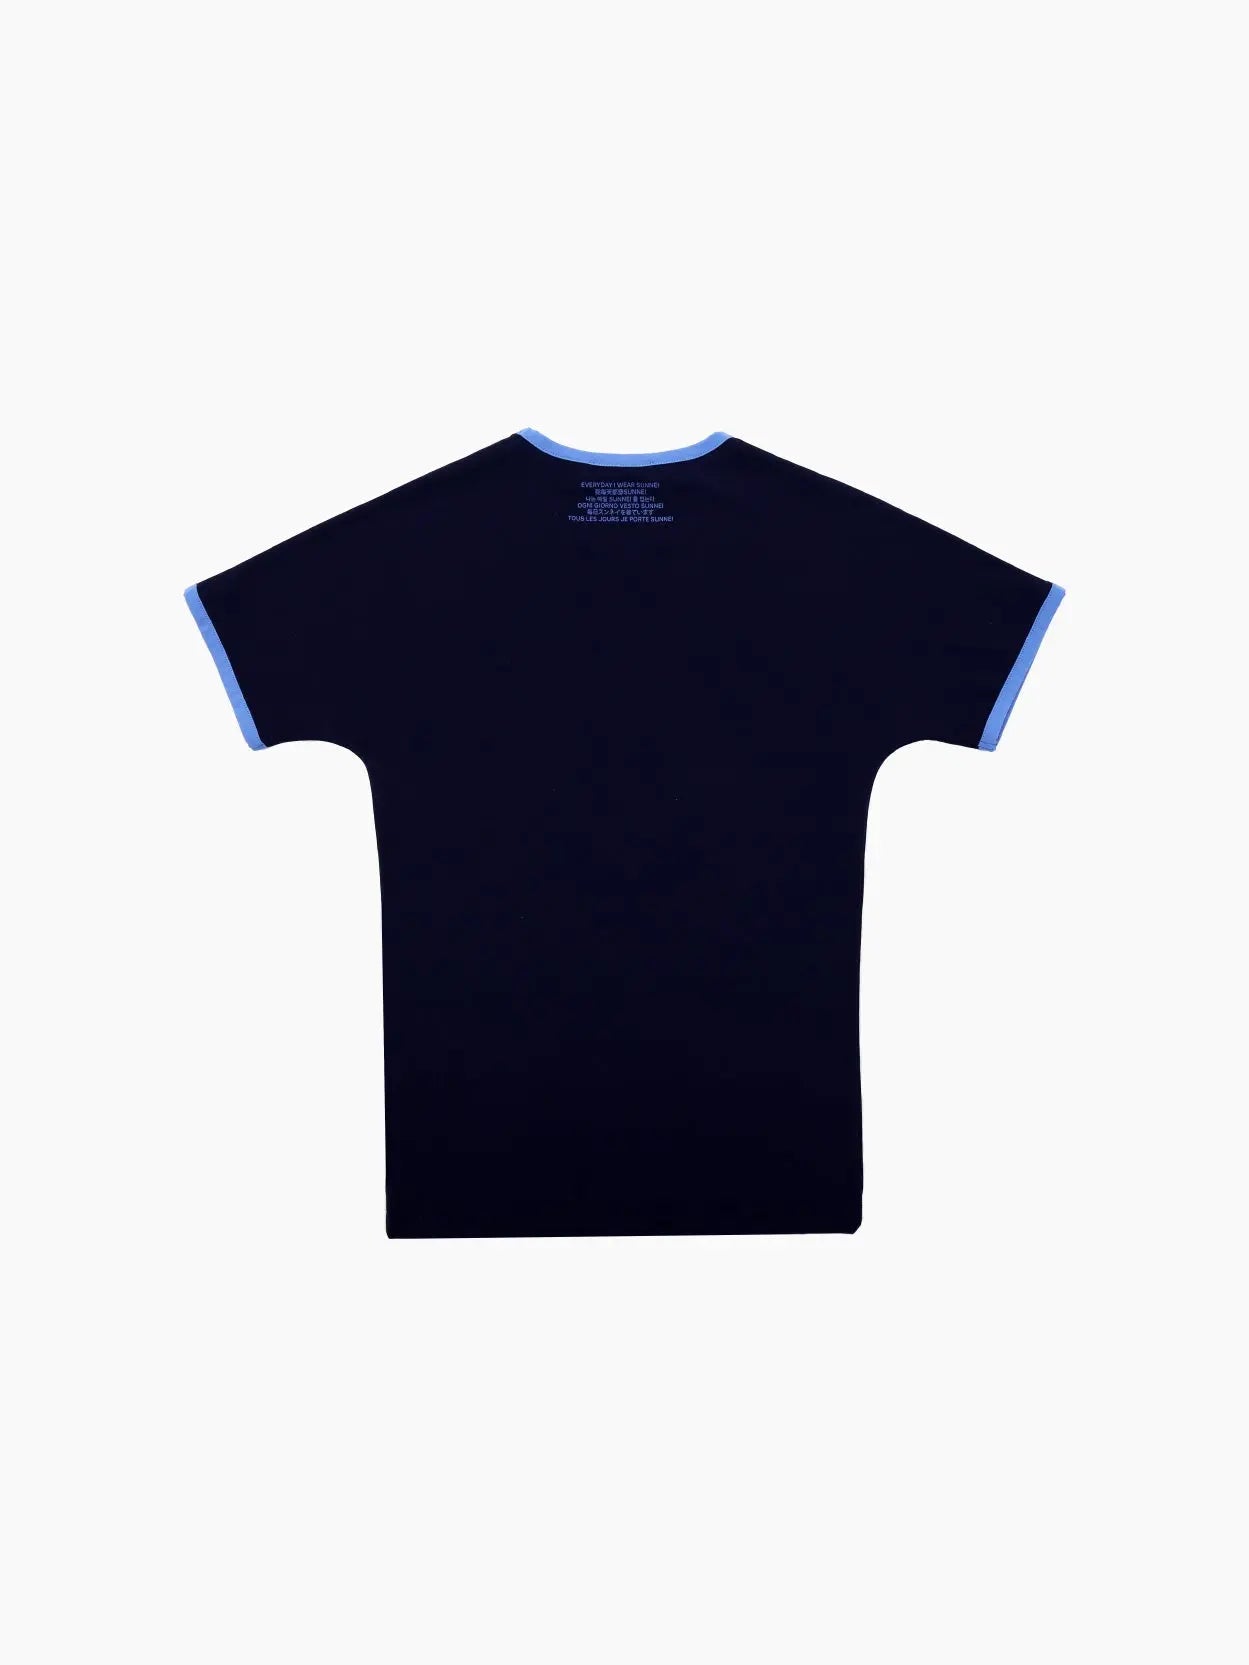 A plain, navy blue Stretchy Shortsleeve Top Navy with light blue trim around the collar and sleeves. The label inside the collar reads "Sunnei." The shirt, available at BassalStore, is displayed against a plain white background.